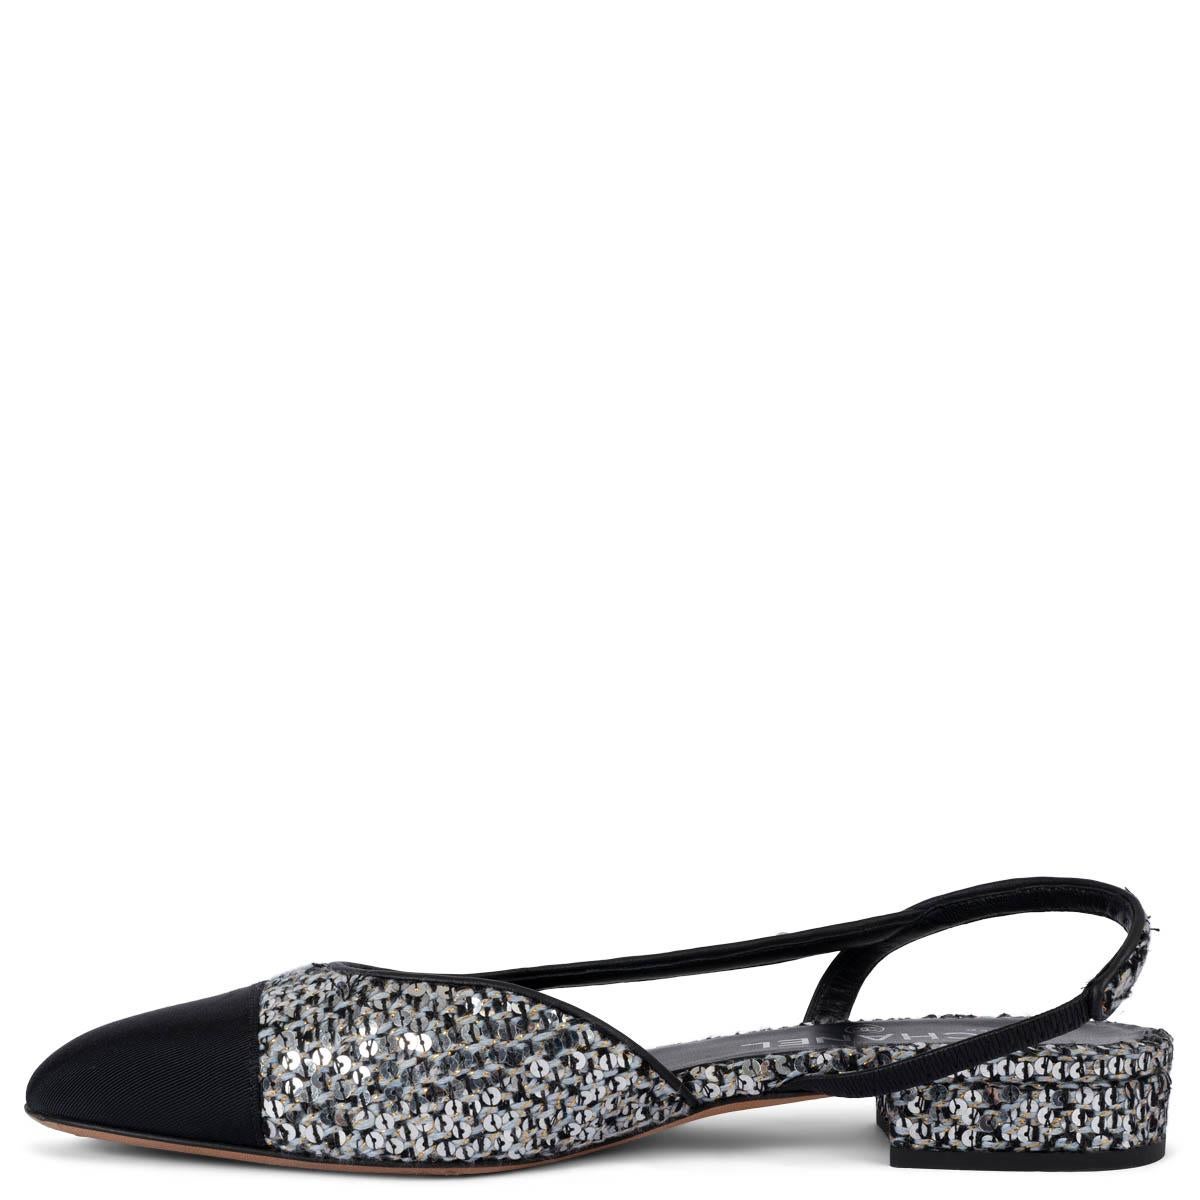 Women's CHANEL silver 2020 20B SEQUIN TWEED Slingback Flats Shoes 38 For Sale